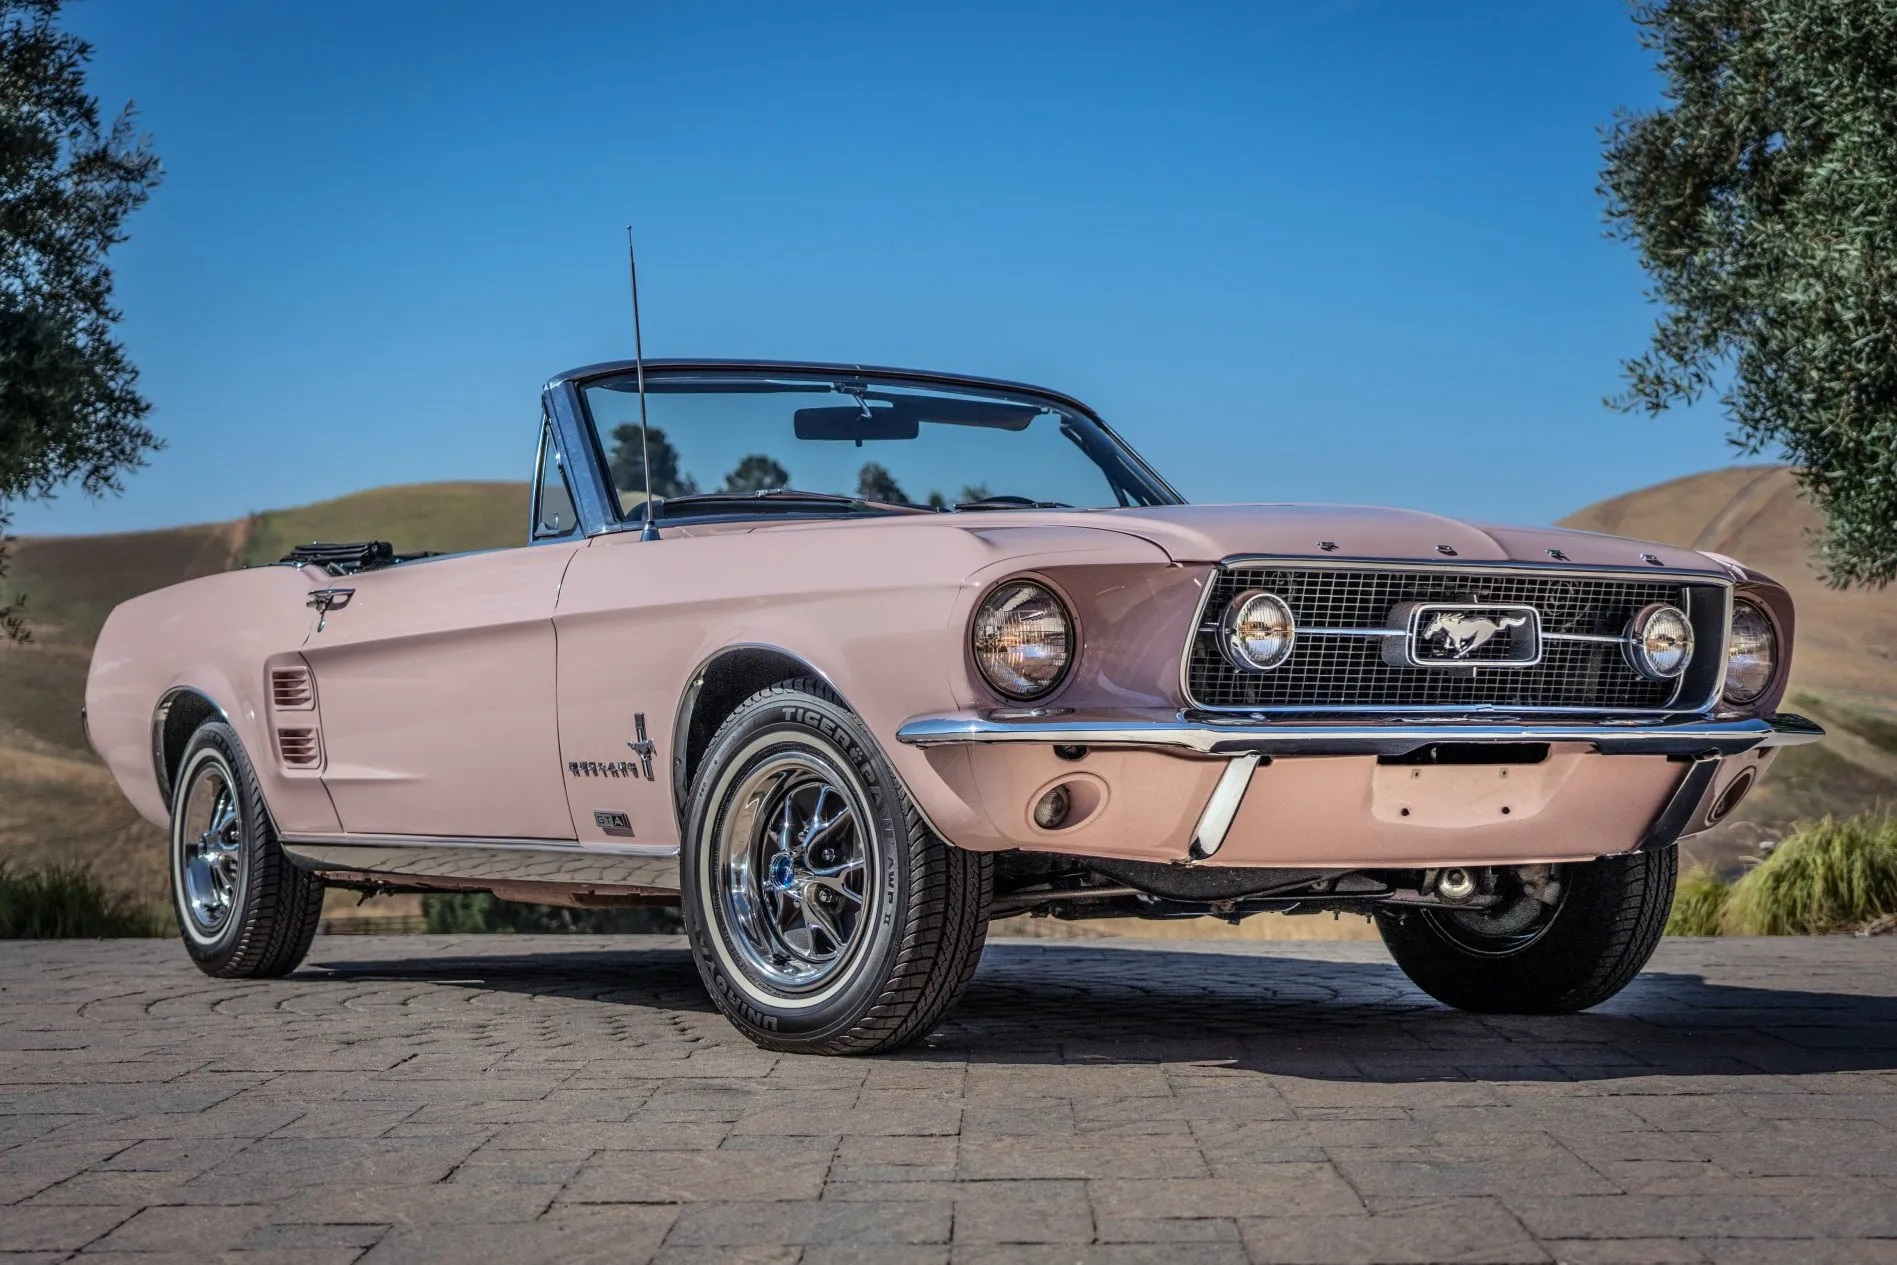 Mustang Of The Day: 1967 Ford Mustang Sports Sprint Convertible